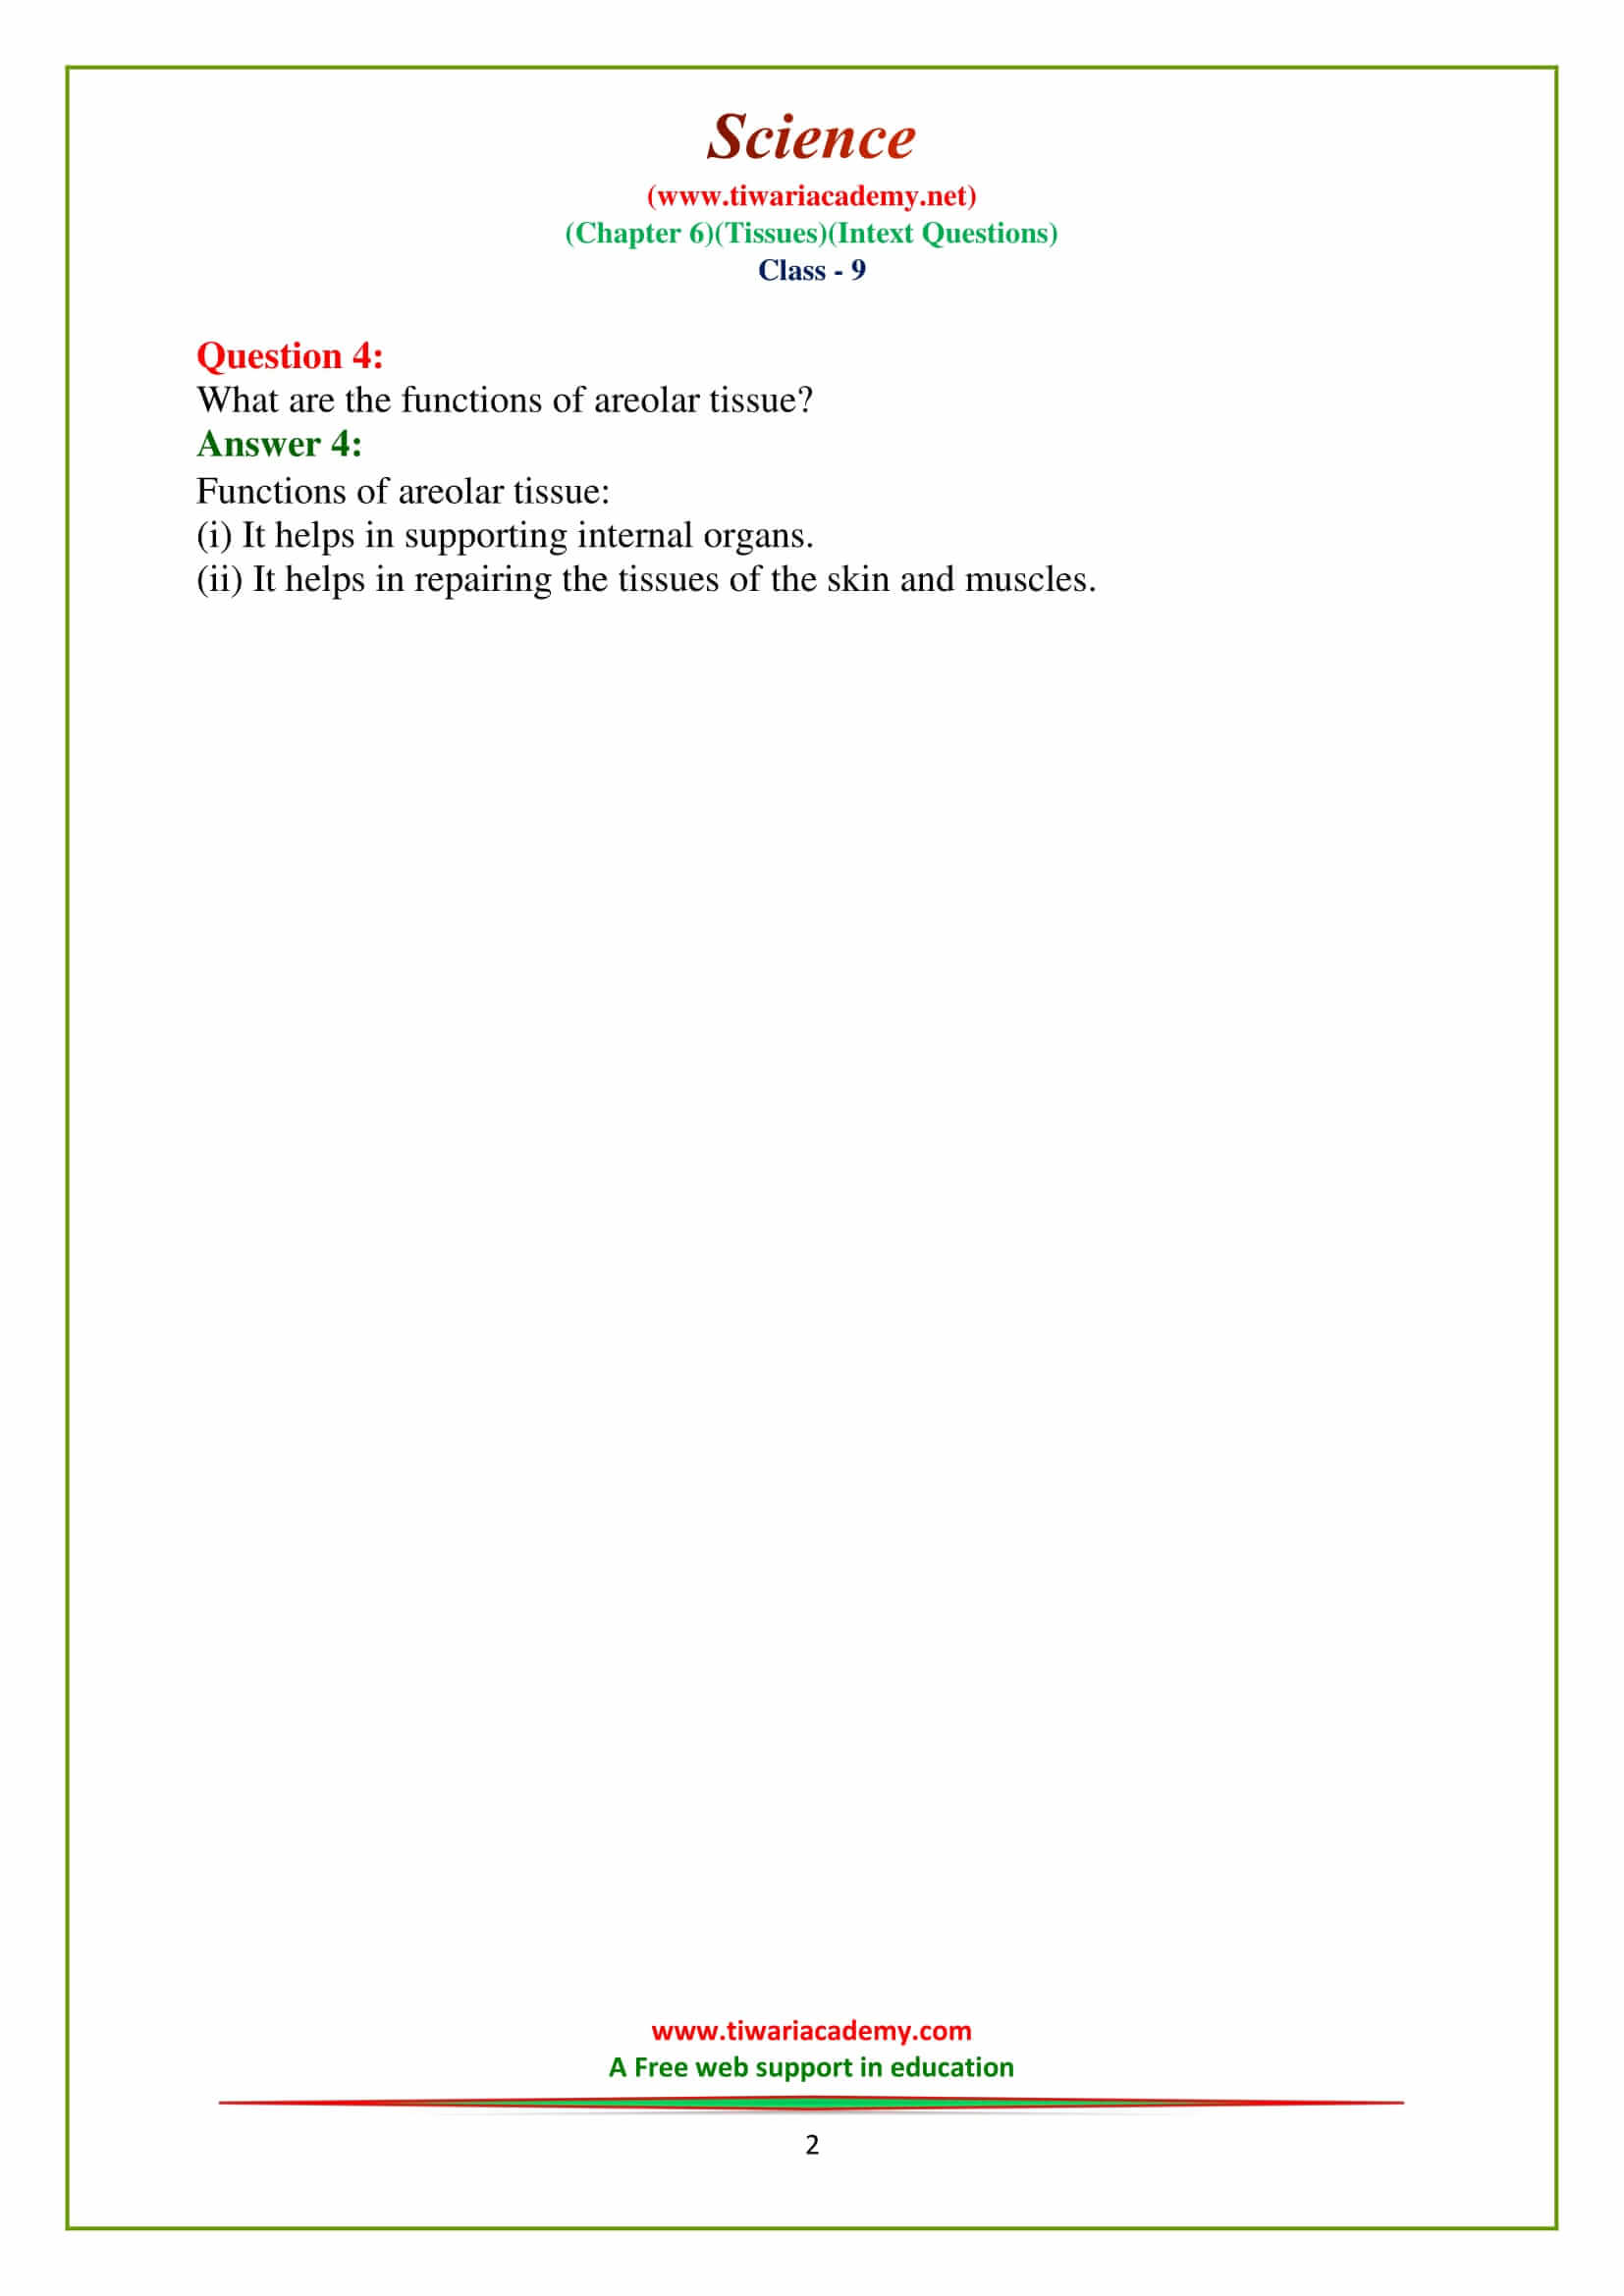 NCERT Solutions for Class 9 Science Chapter 6 all questions